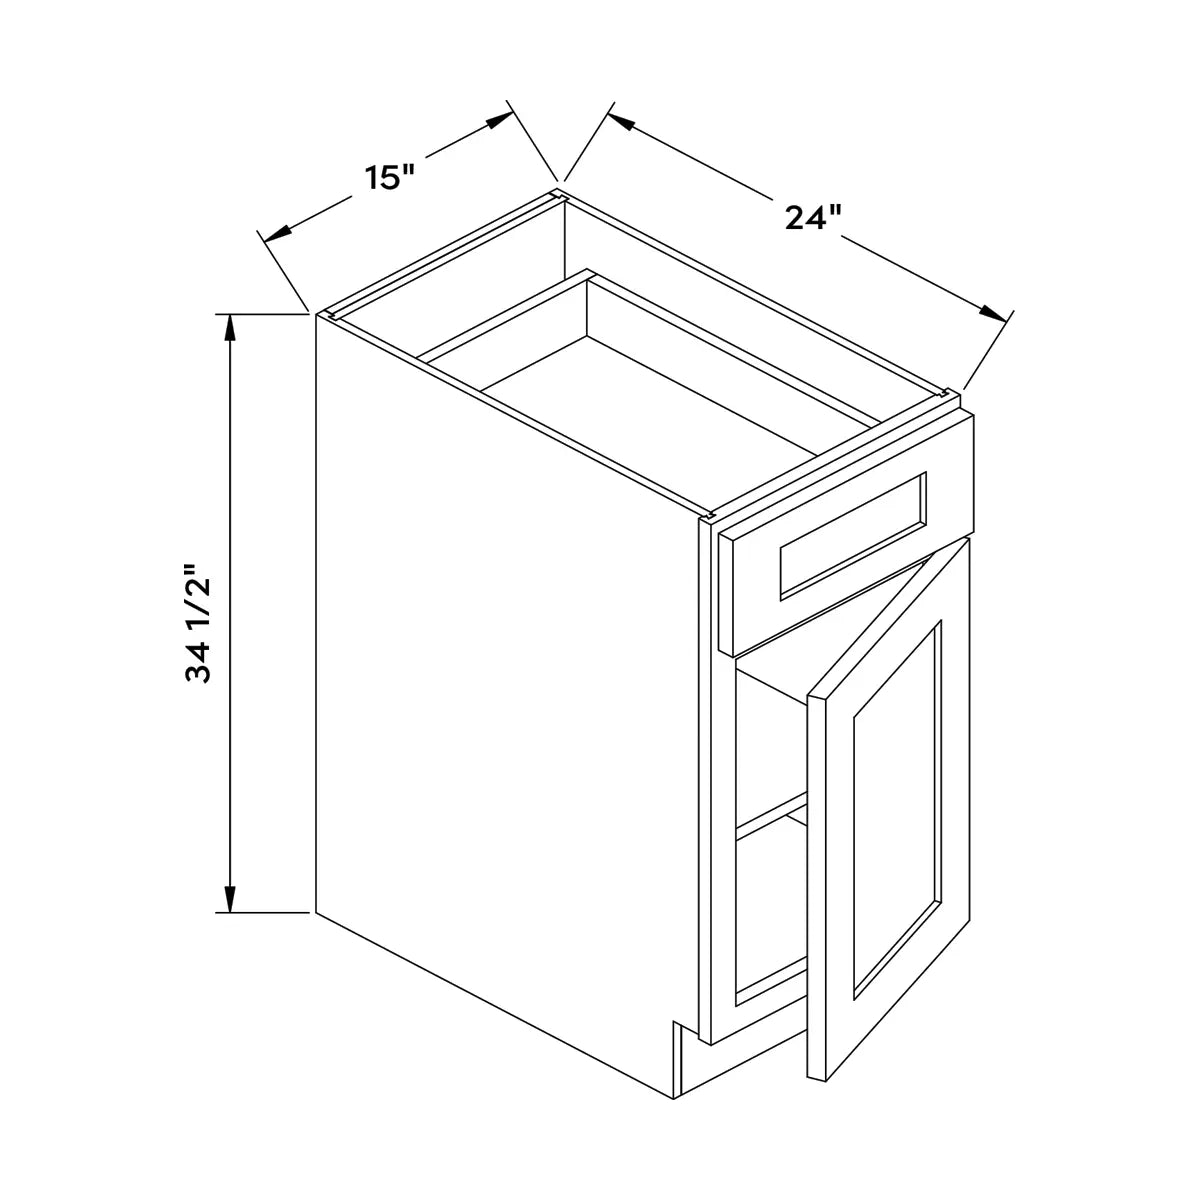 Craft Cabinetry Shaker Aqua 15”W Base Cabinet Image Specifications